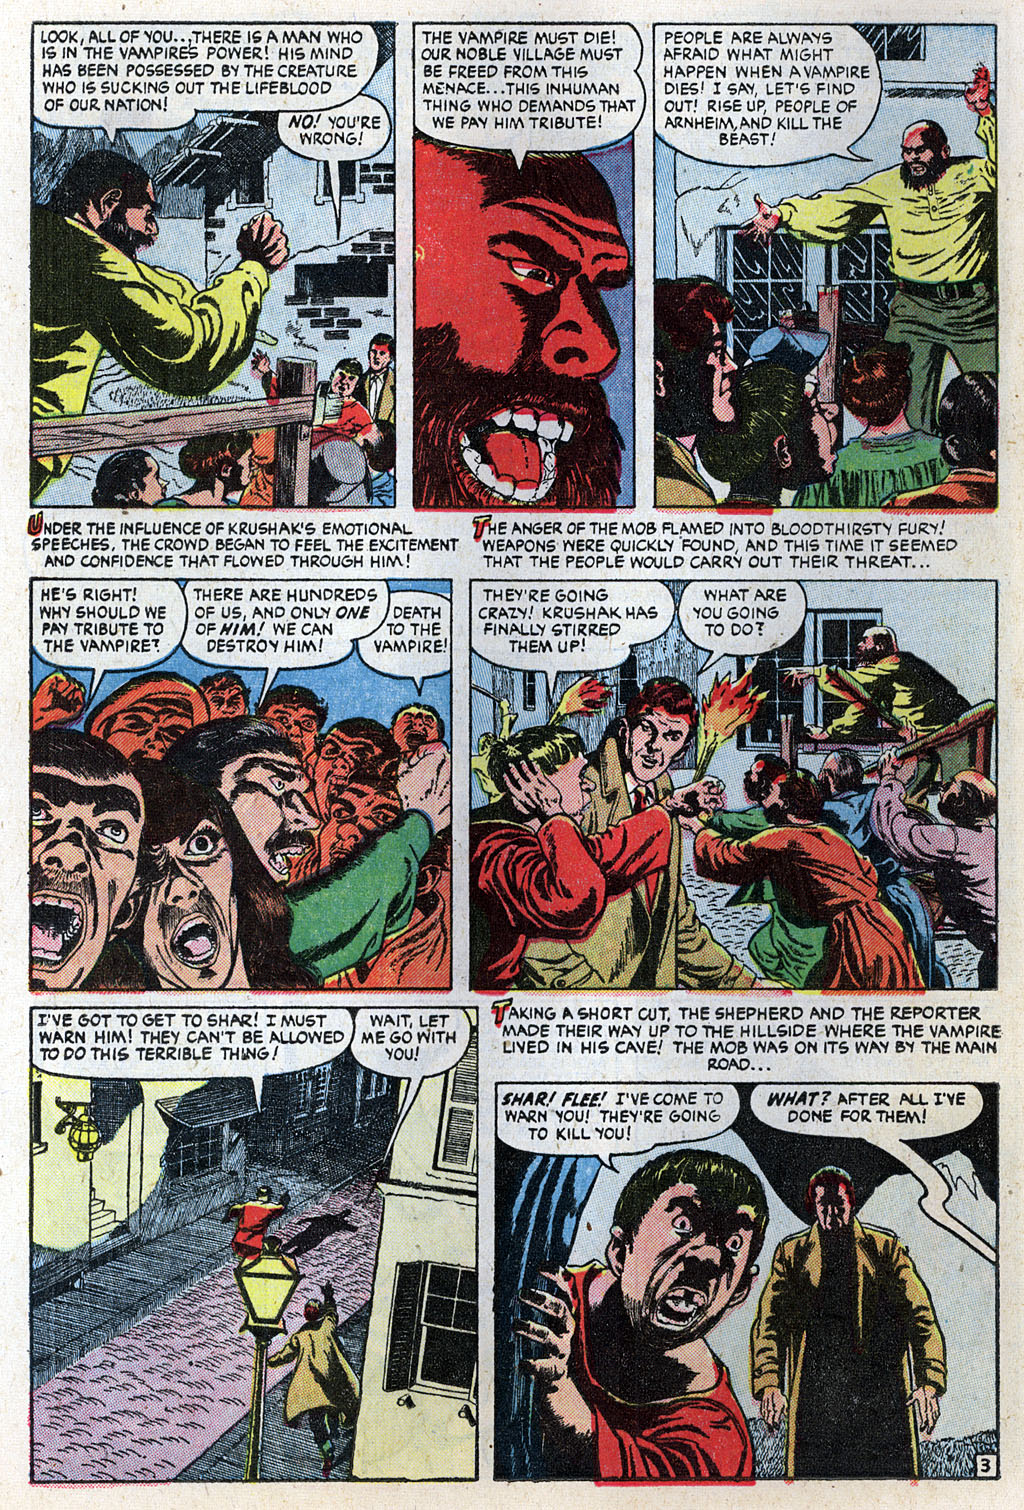 Marvel Tales (1949) 128 Page 11